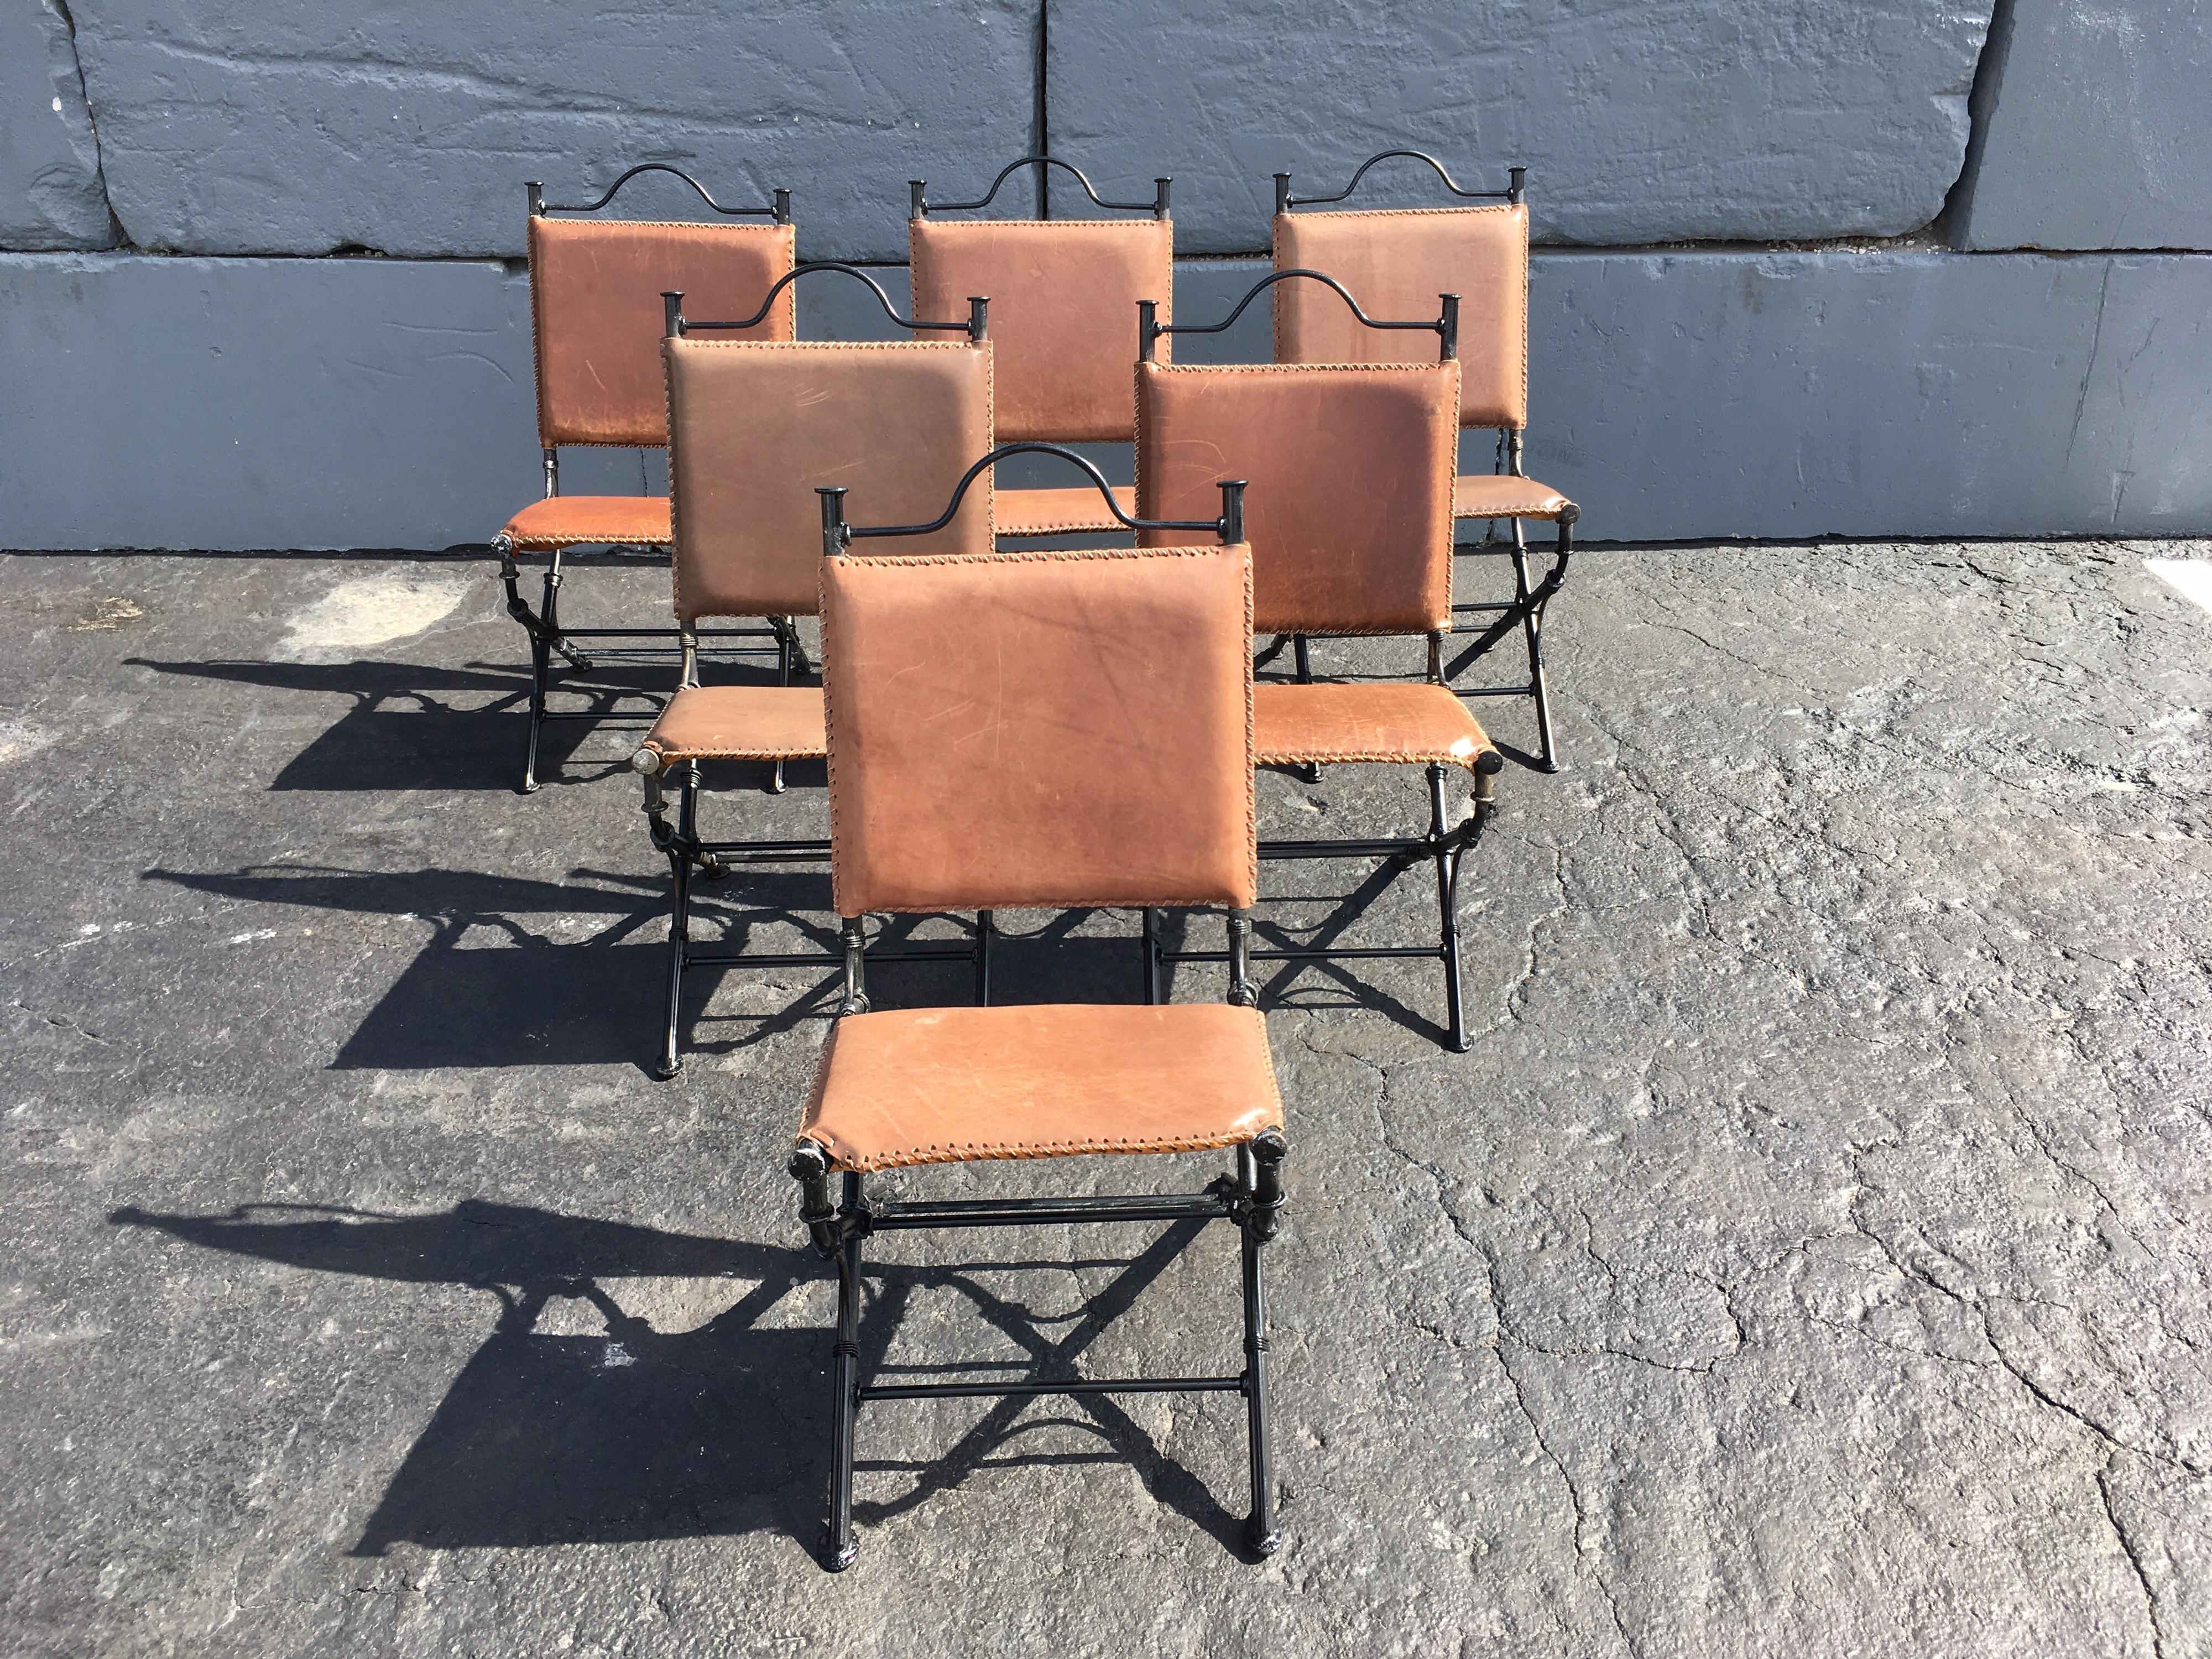 iron and leather dining chairs